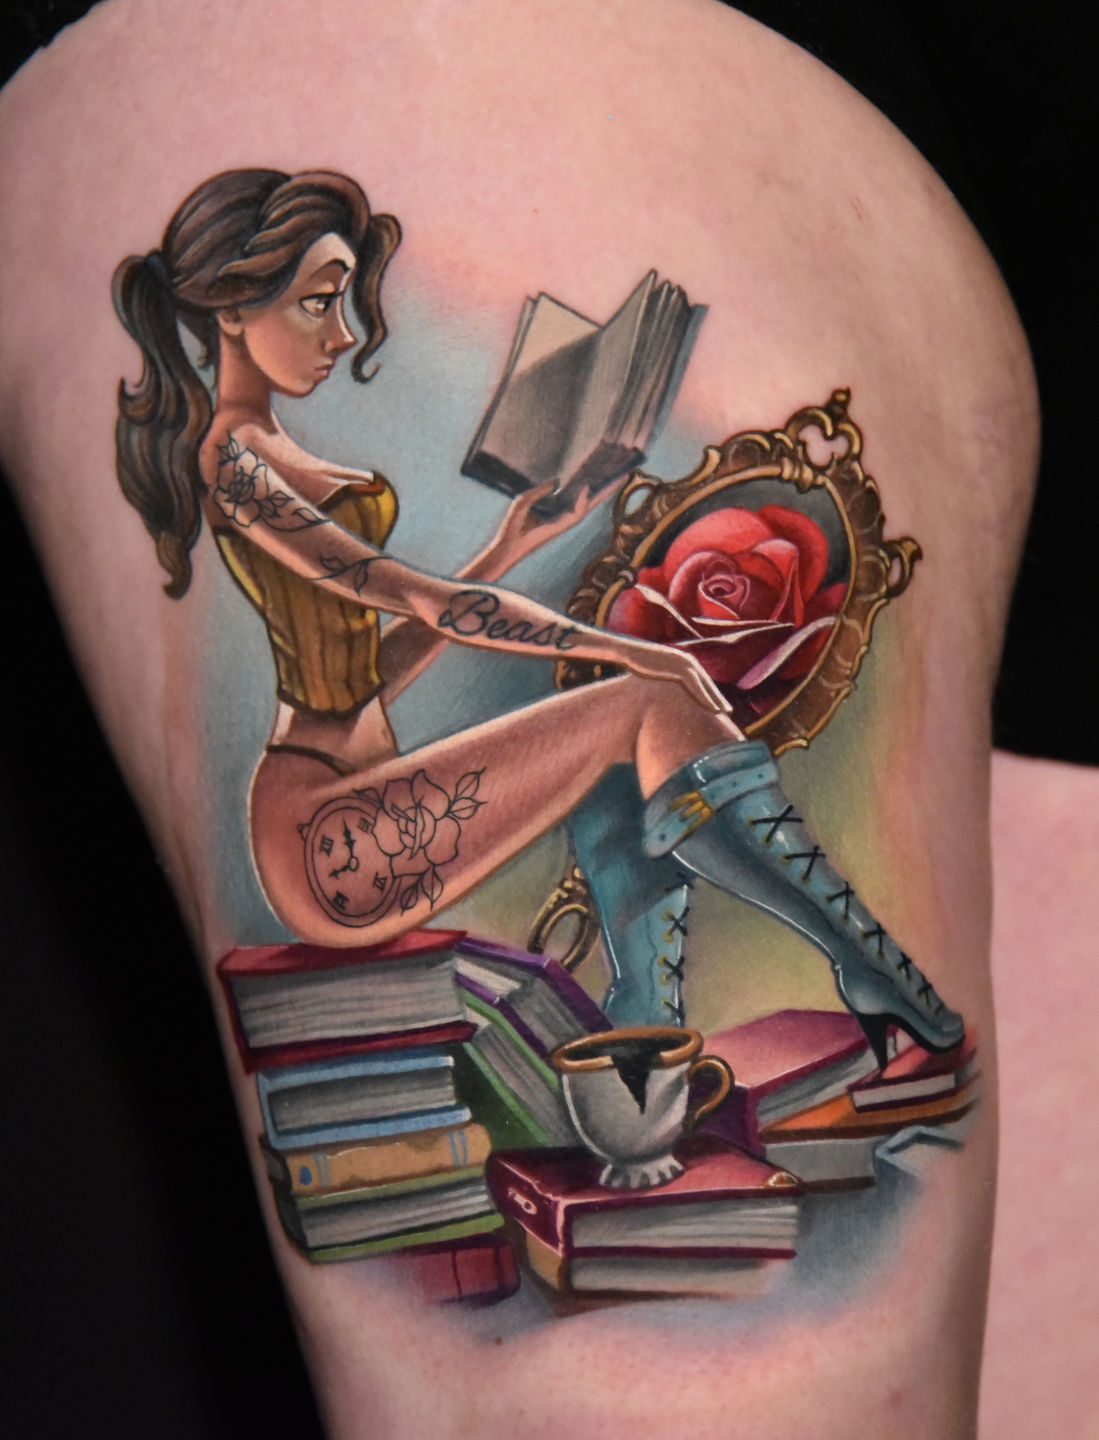 Tim Shumate Illustrations  Tattoo of the Day 22818 Claudiareato at